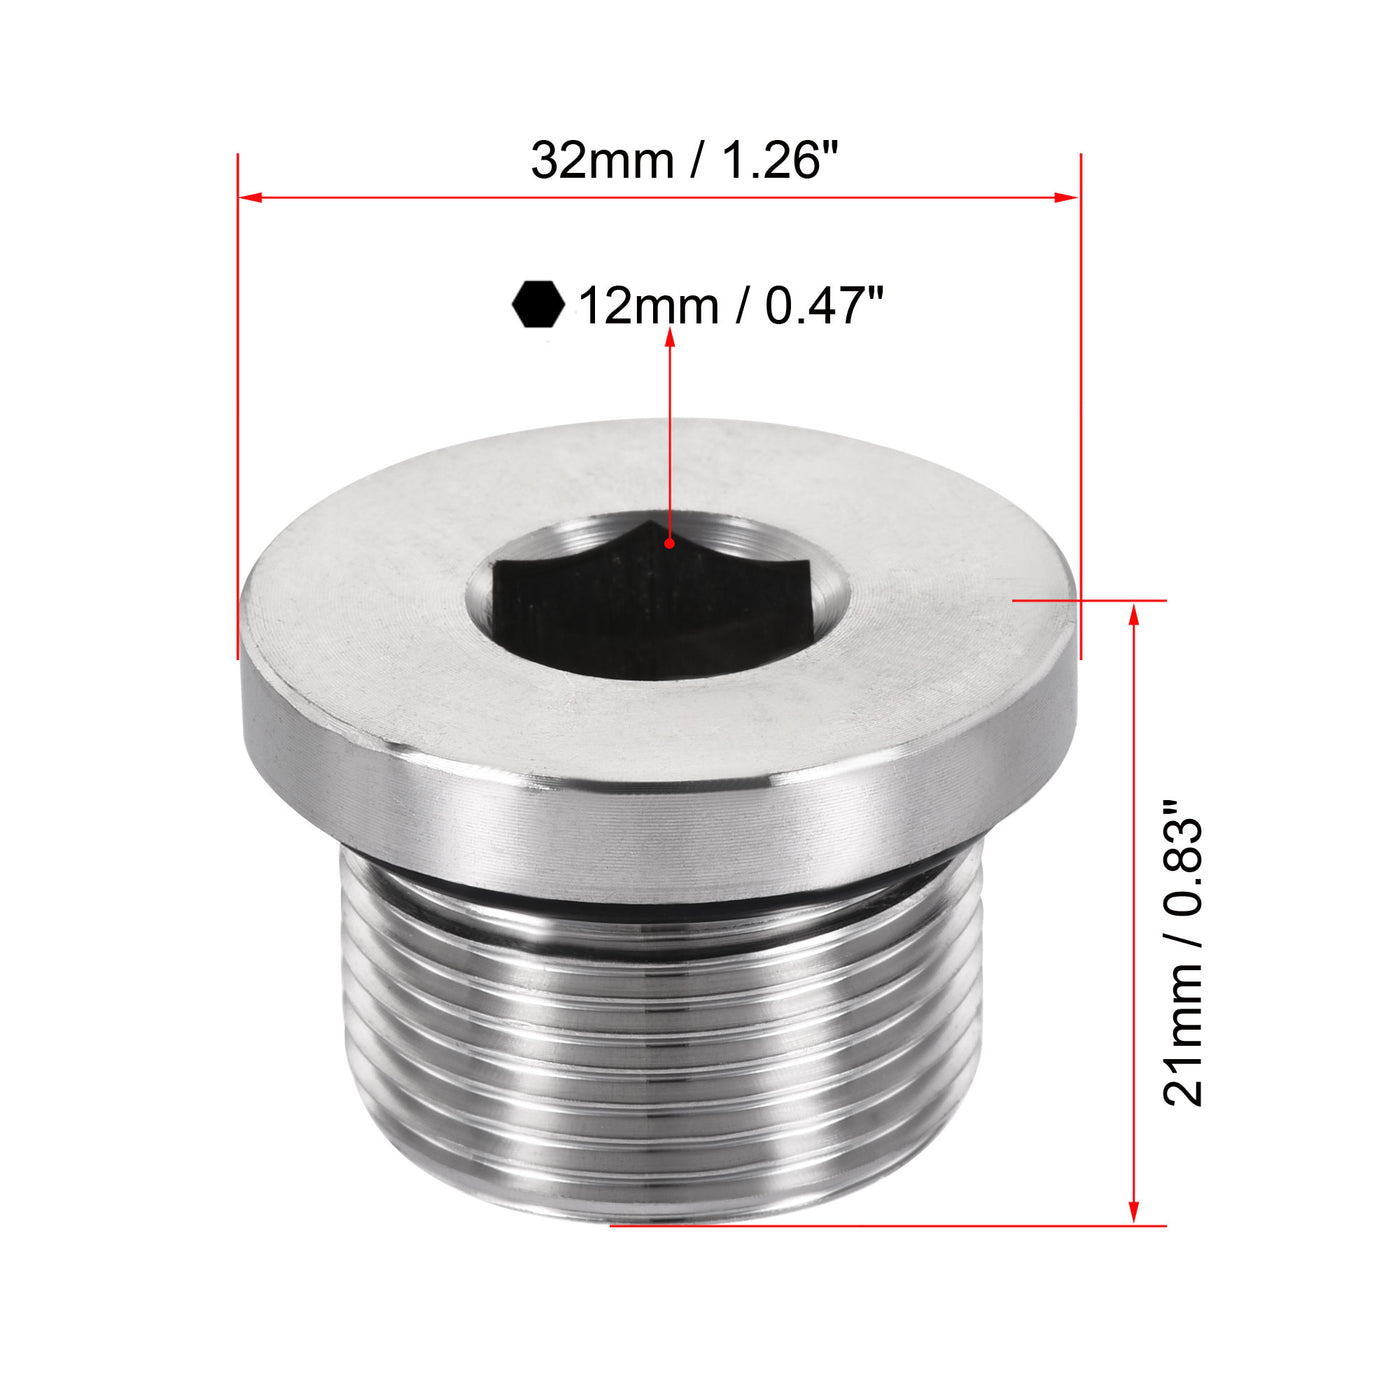 uxcell Uxcell Stainless Steel Inner Hex Head M25x1.5 Pipe Fitting Plug with Seal Ring